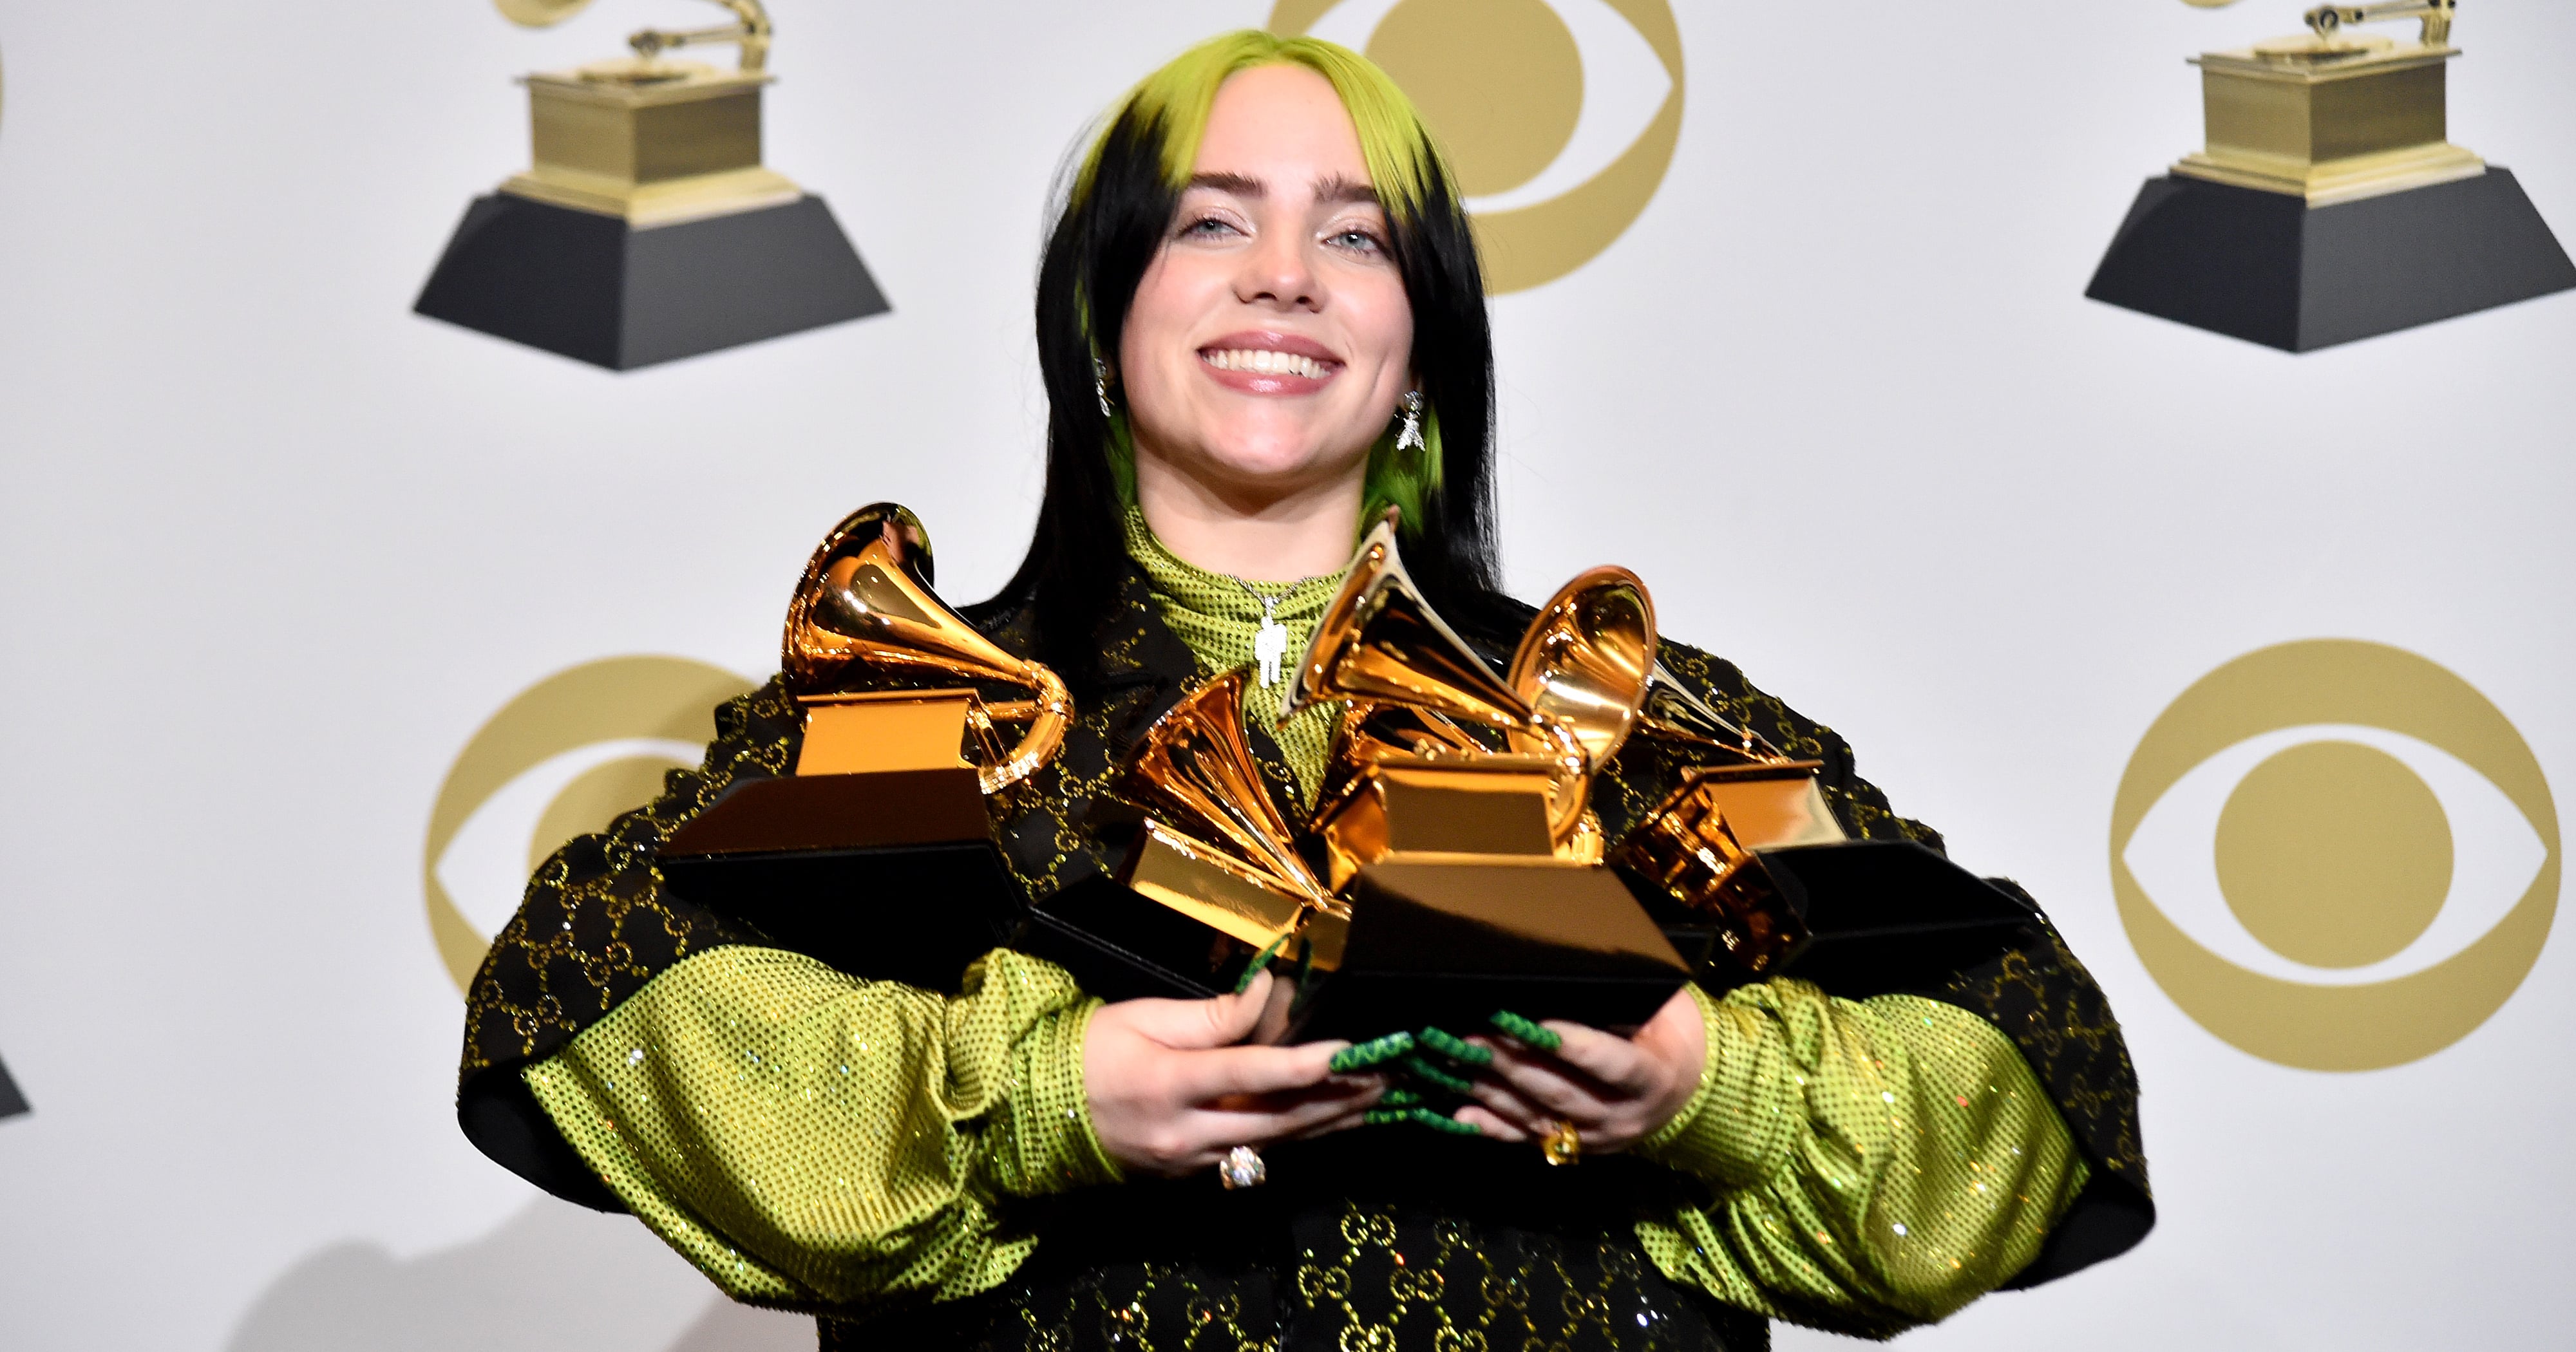 Billie Eilish: 15 years old but wise beyond her years